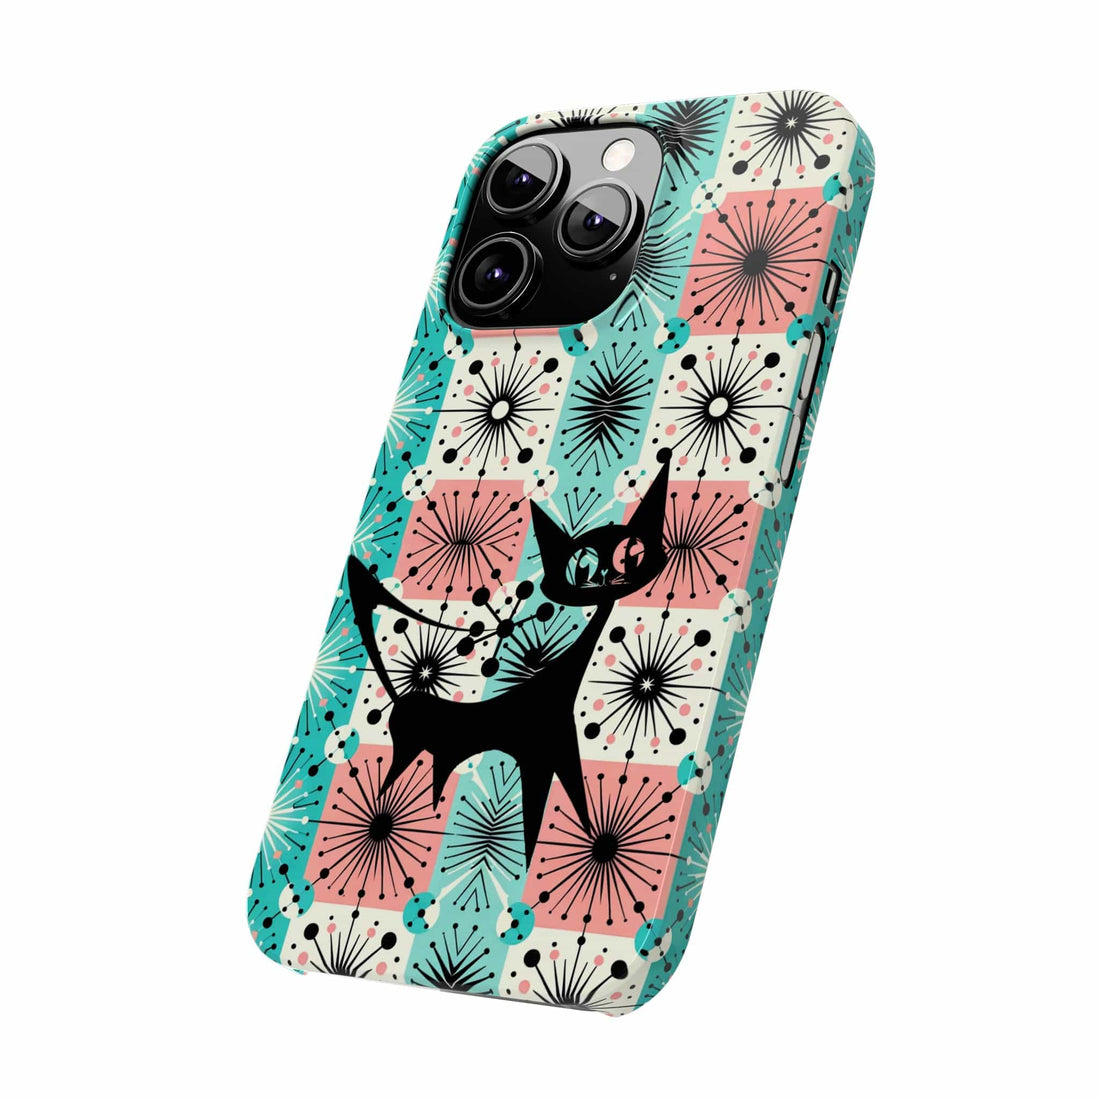 Atomic Kitschy Cat, Mid Century Modern Pink, Aqua Starbursts, iPhone 15 And More Slim Phone Cases Phone Case iPhone 13 Pro